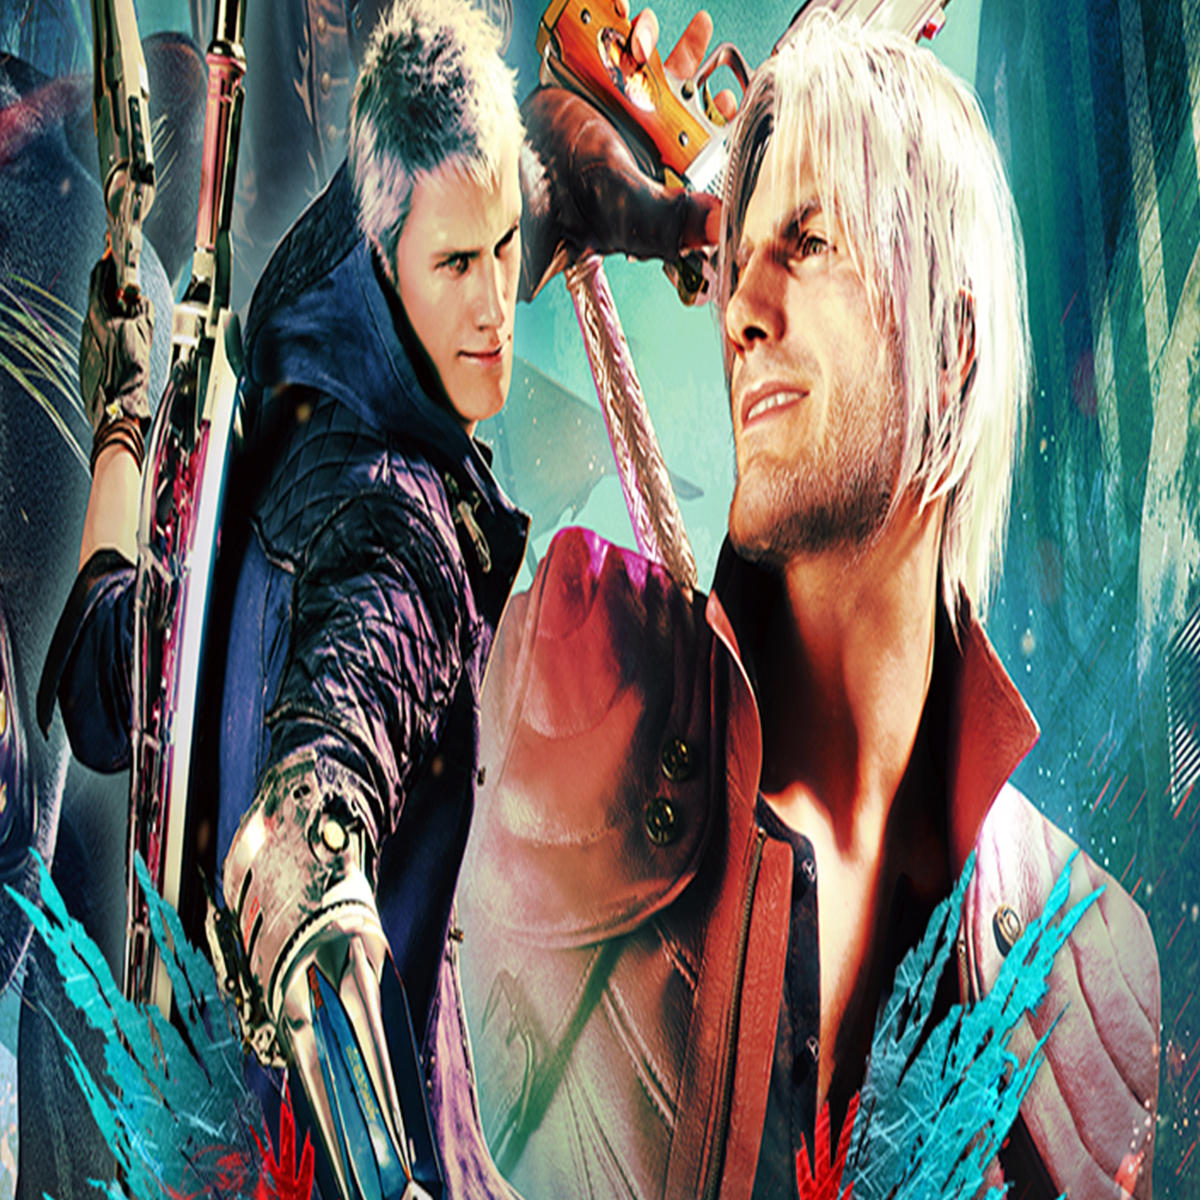 Análise Devil May Cry 5 (Playstation 5)